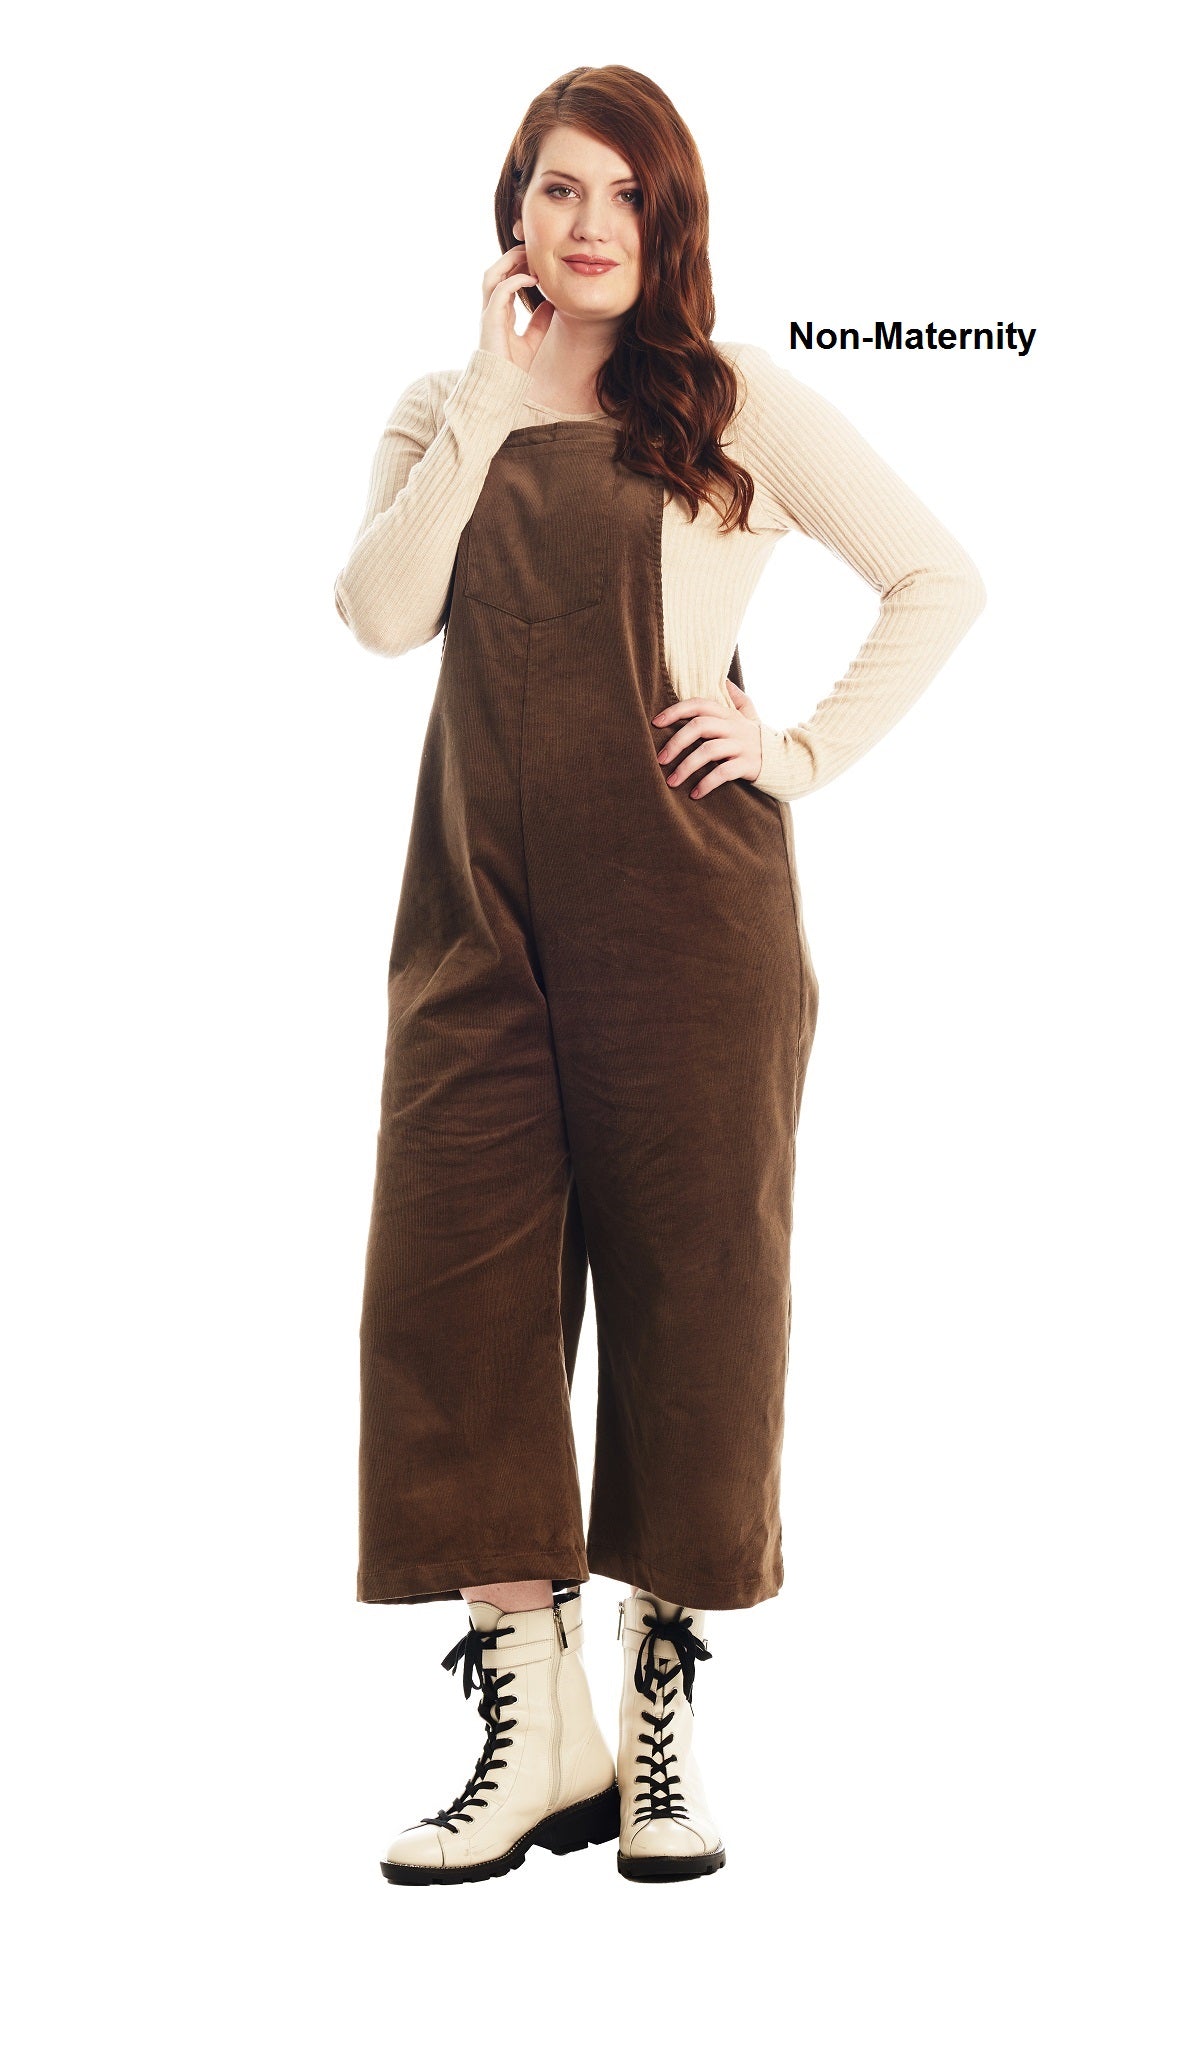 Olive Carlita overall worn by woman as non-pregnant style with one hand on her hip and other hand touching her face..